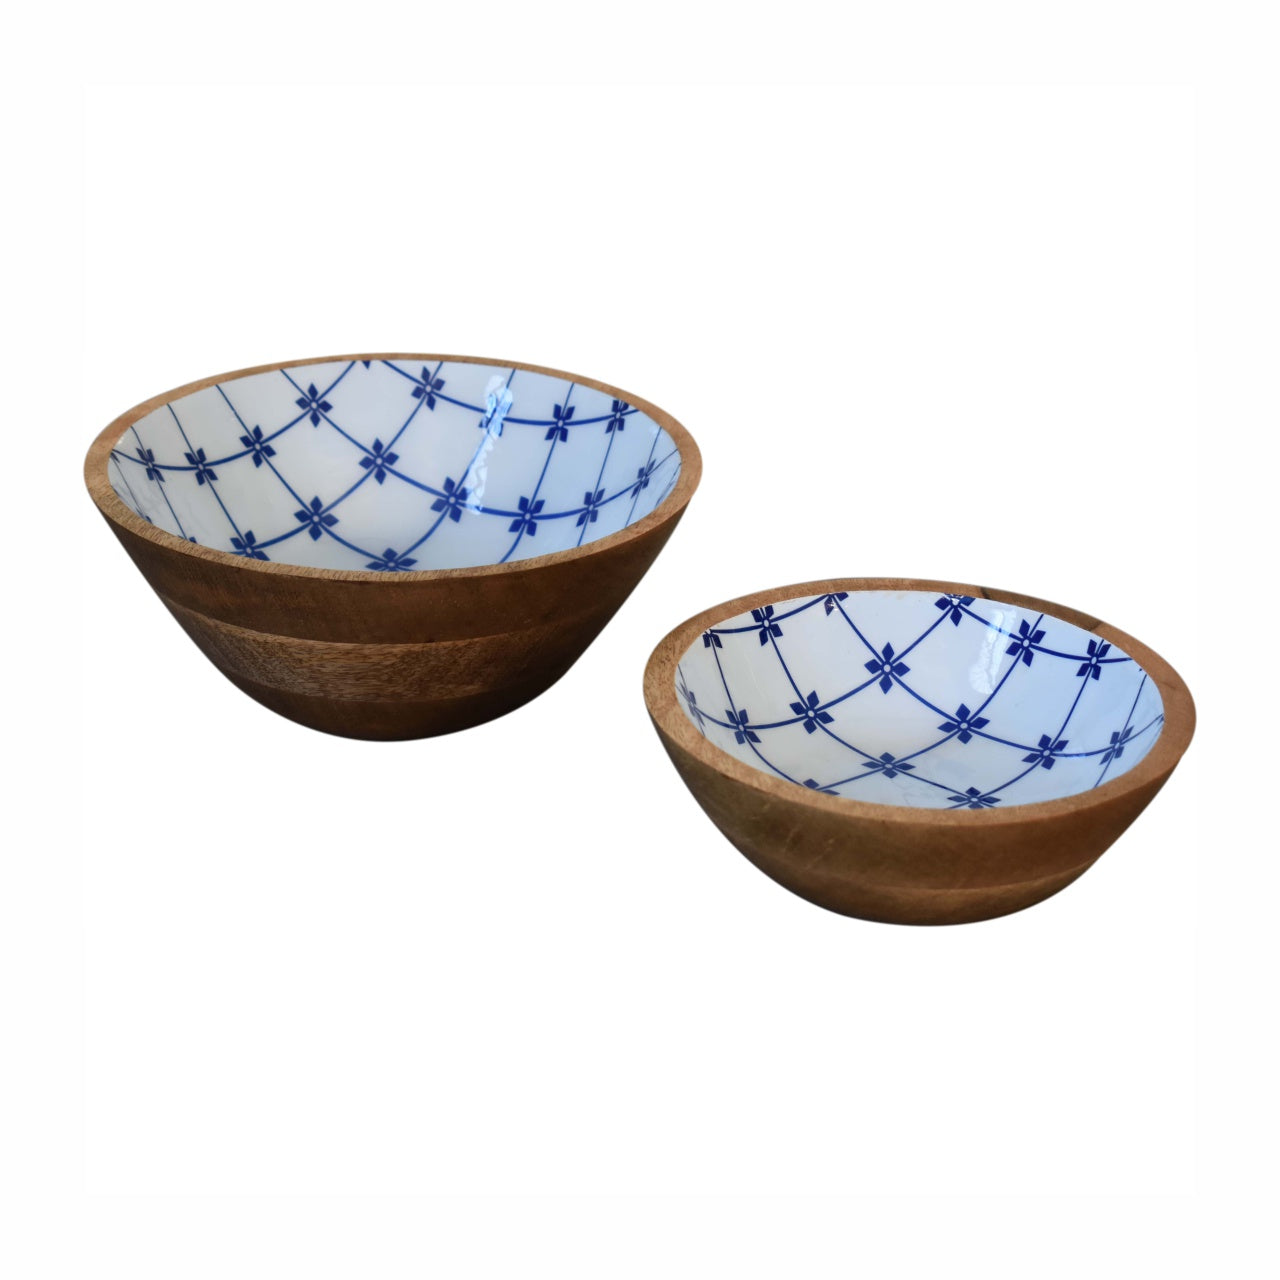 View Blue and White Bowl Set of 2 information